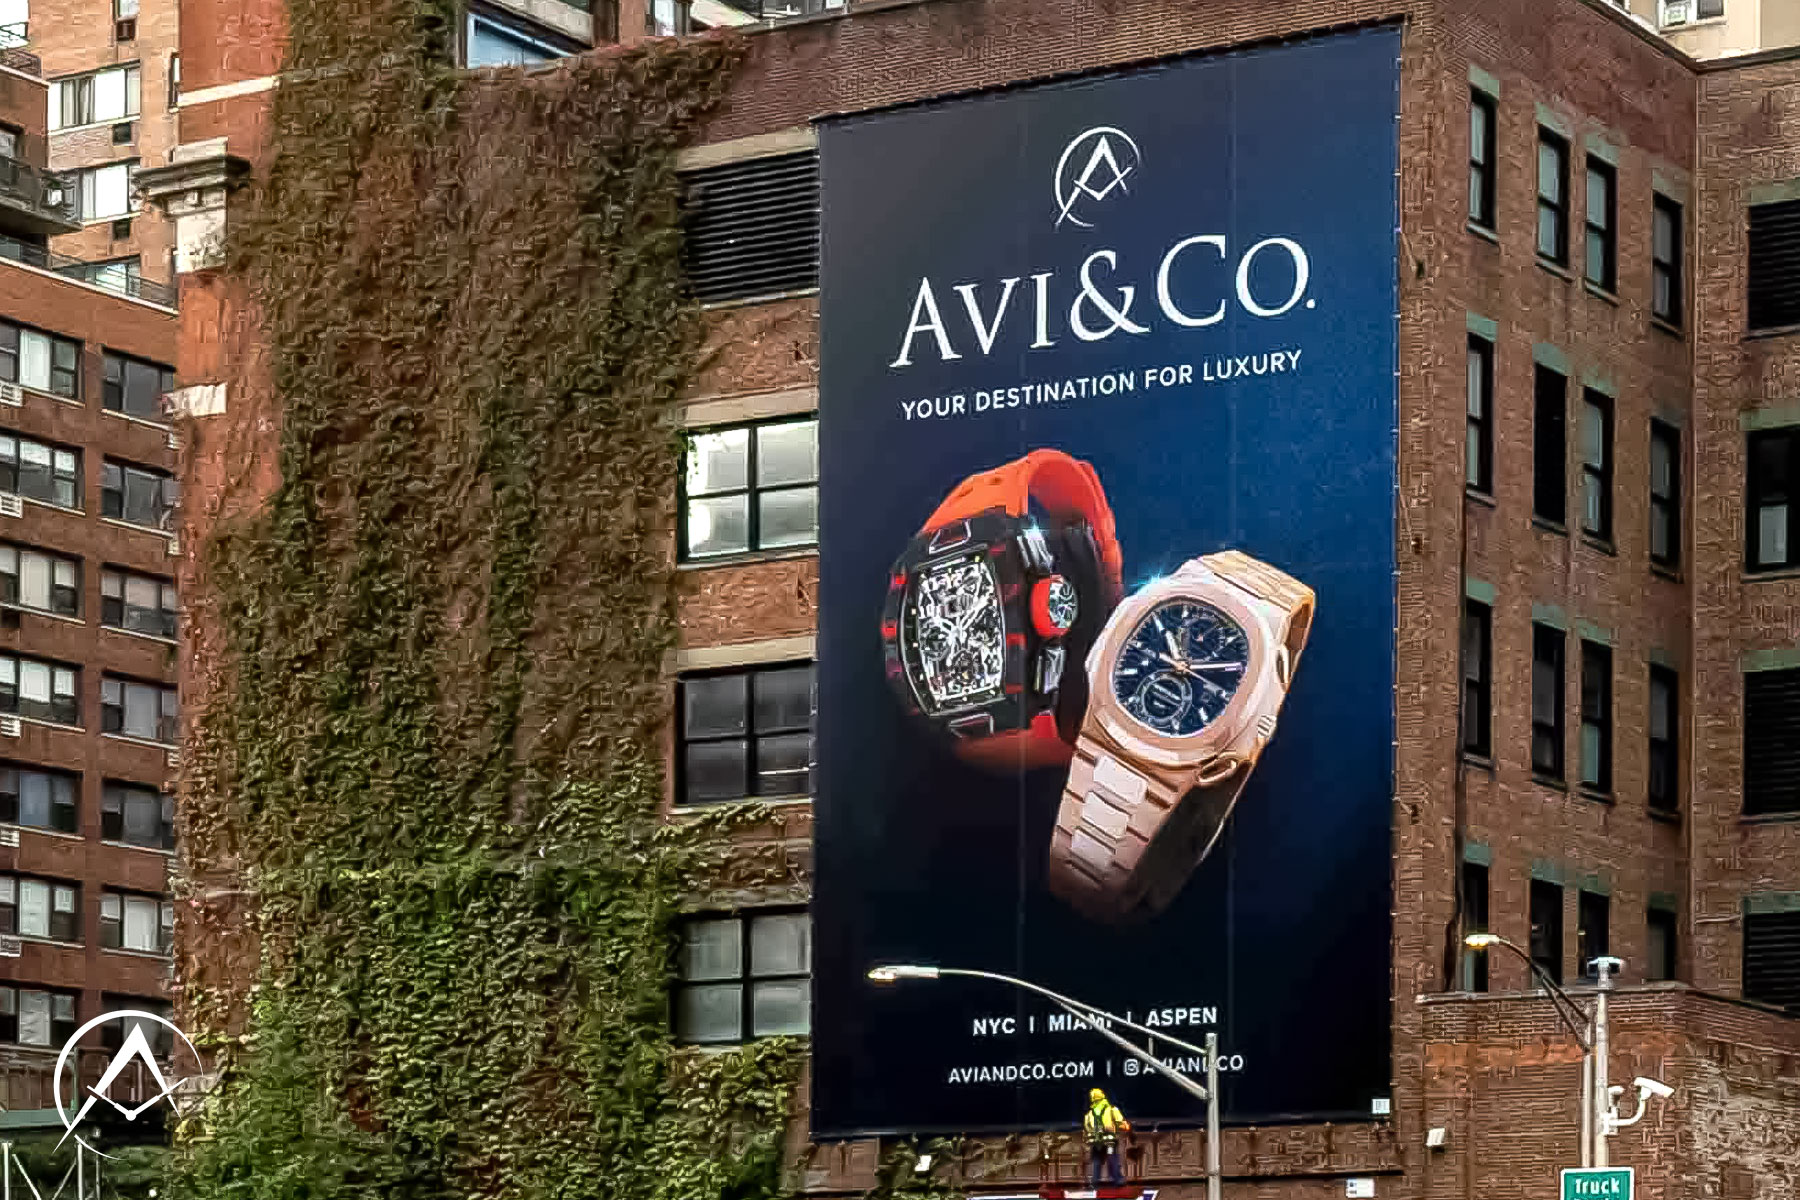 A Billboard in Front of a Building with the Avi & Co. Logo, the McLaren Richard Mille Watch, and a Patek Philippe Watch Advertising our Boutique in The Diamond District.